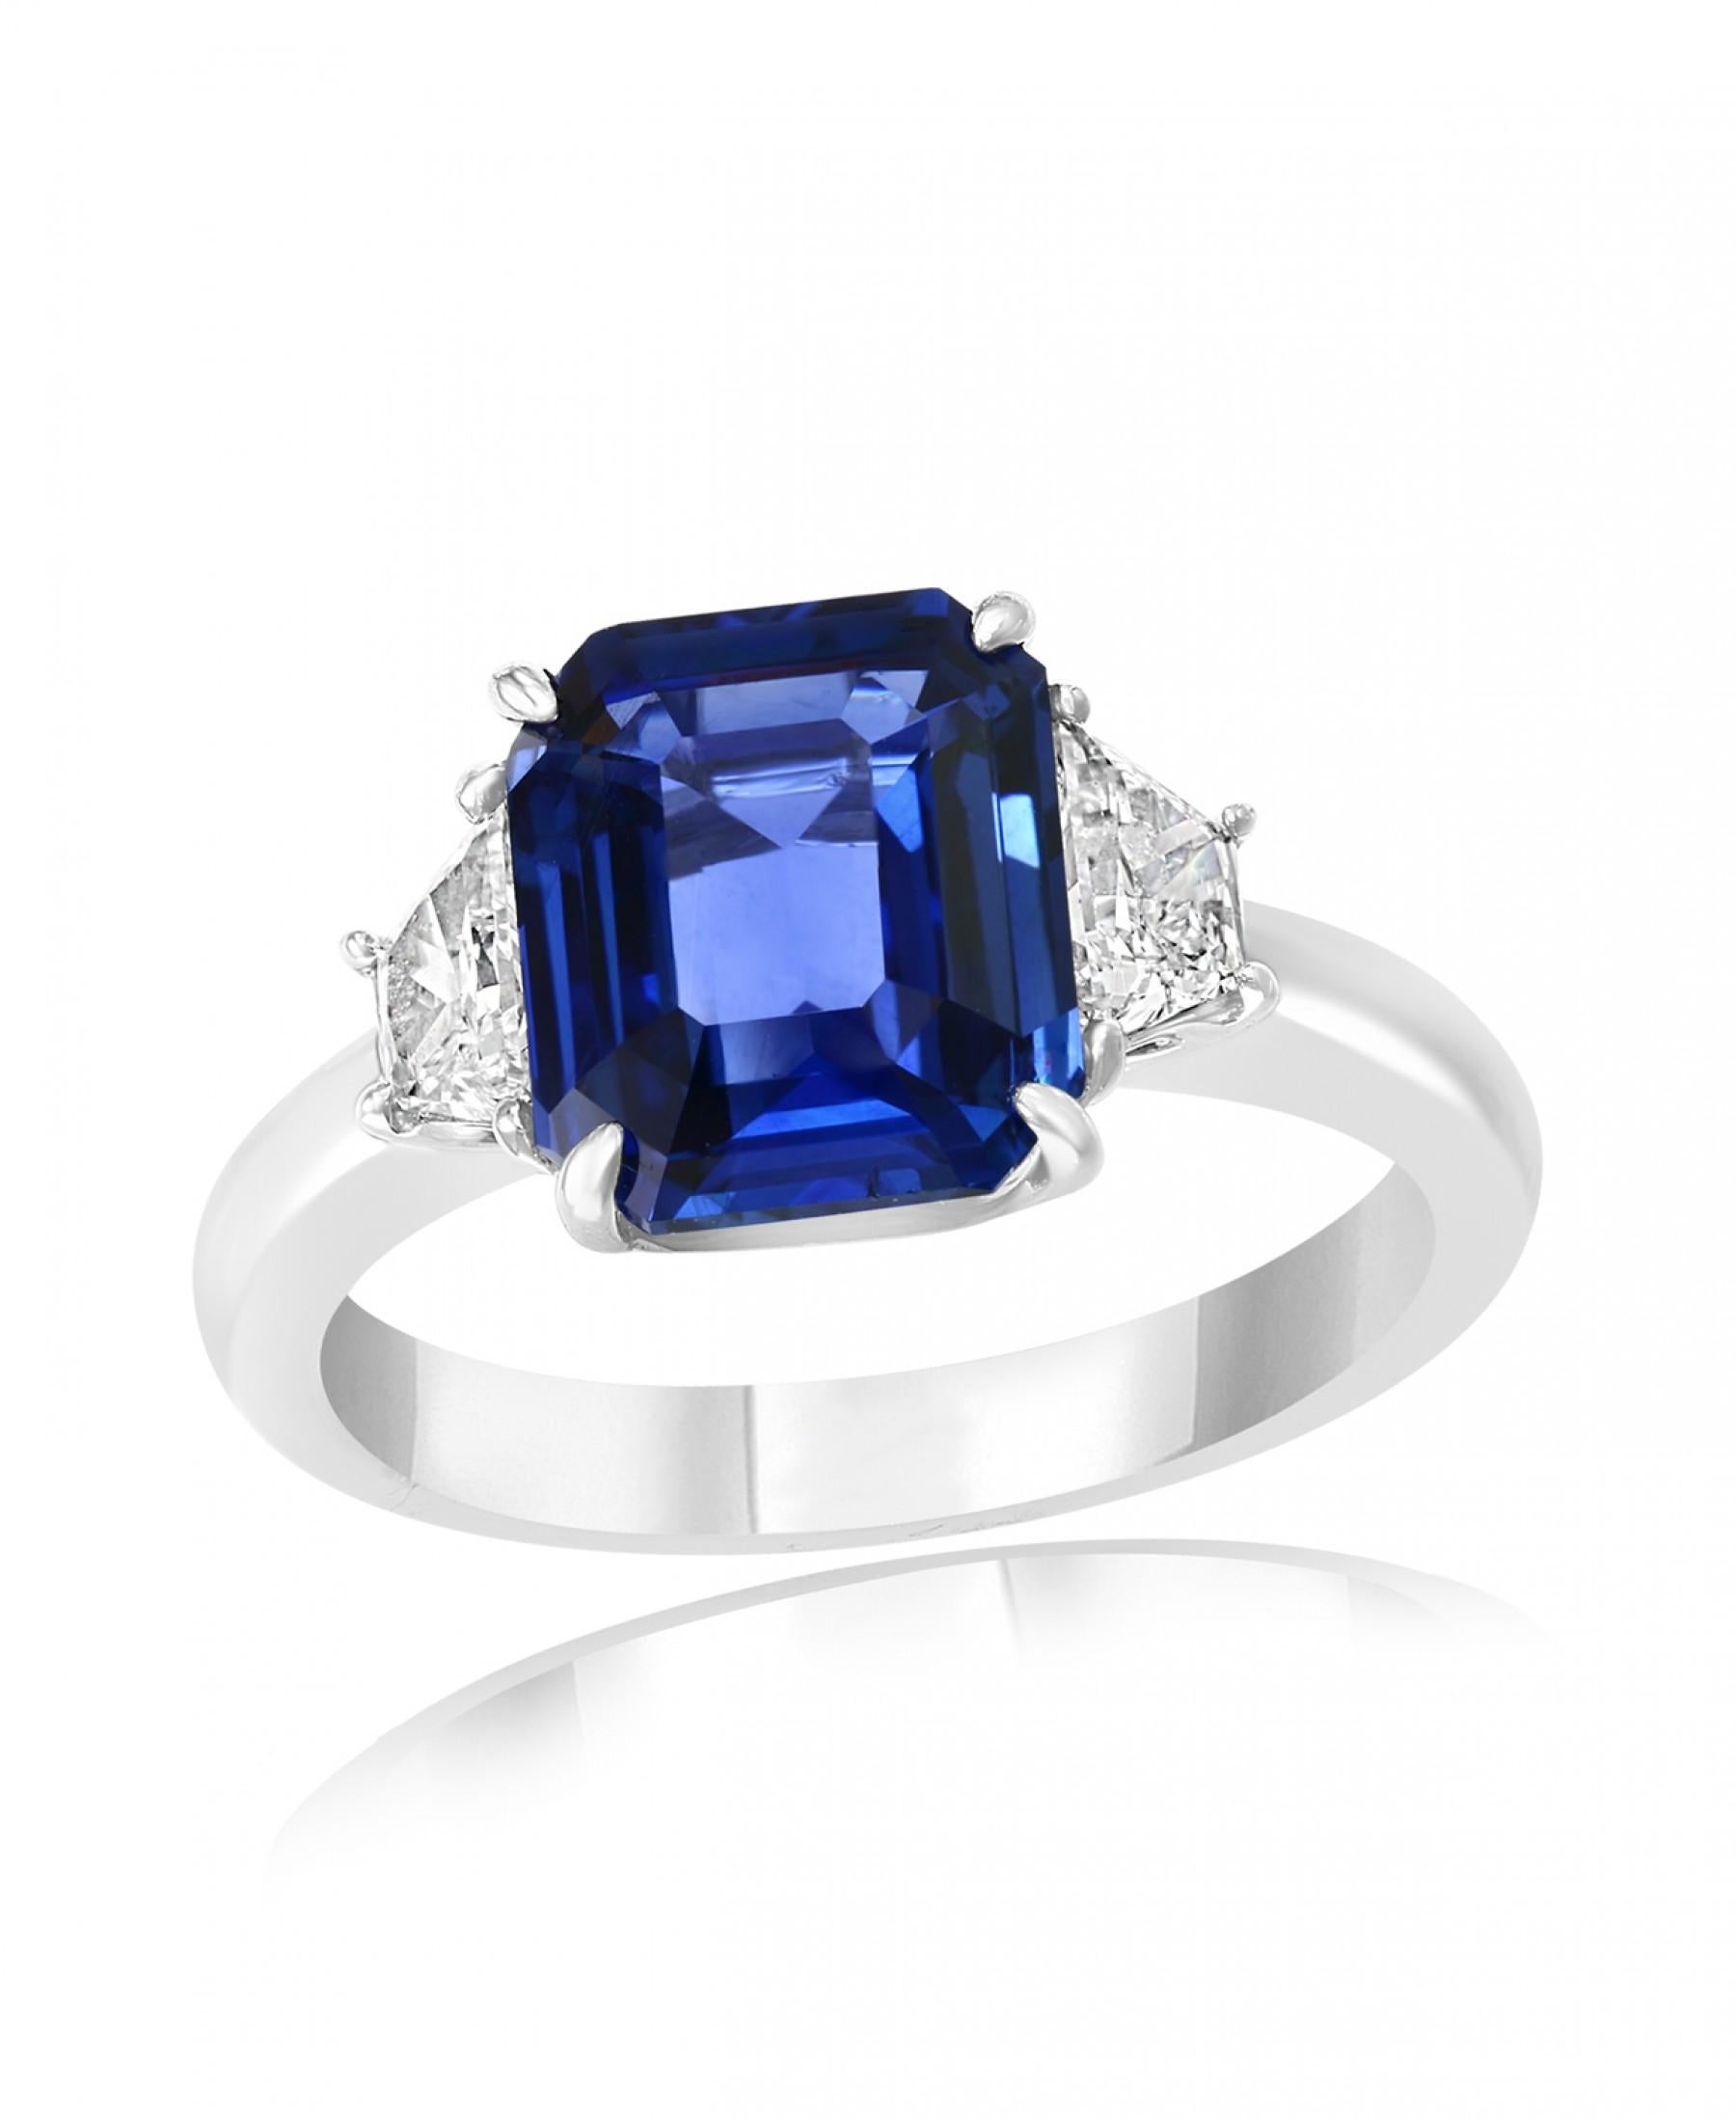 Women's or Men's 5.11 Carat Emerald Cut Sapphire with Two Accent Diamonds Totaling .52 Carat For Sale